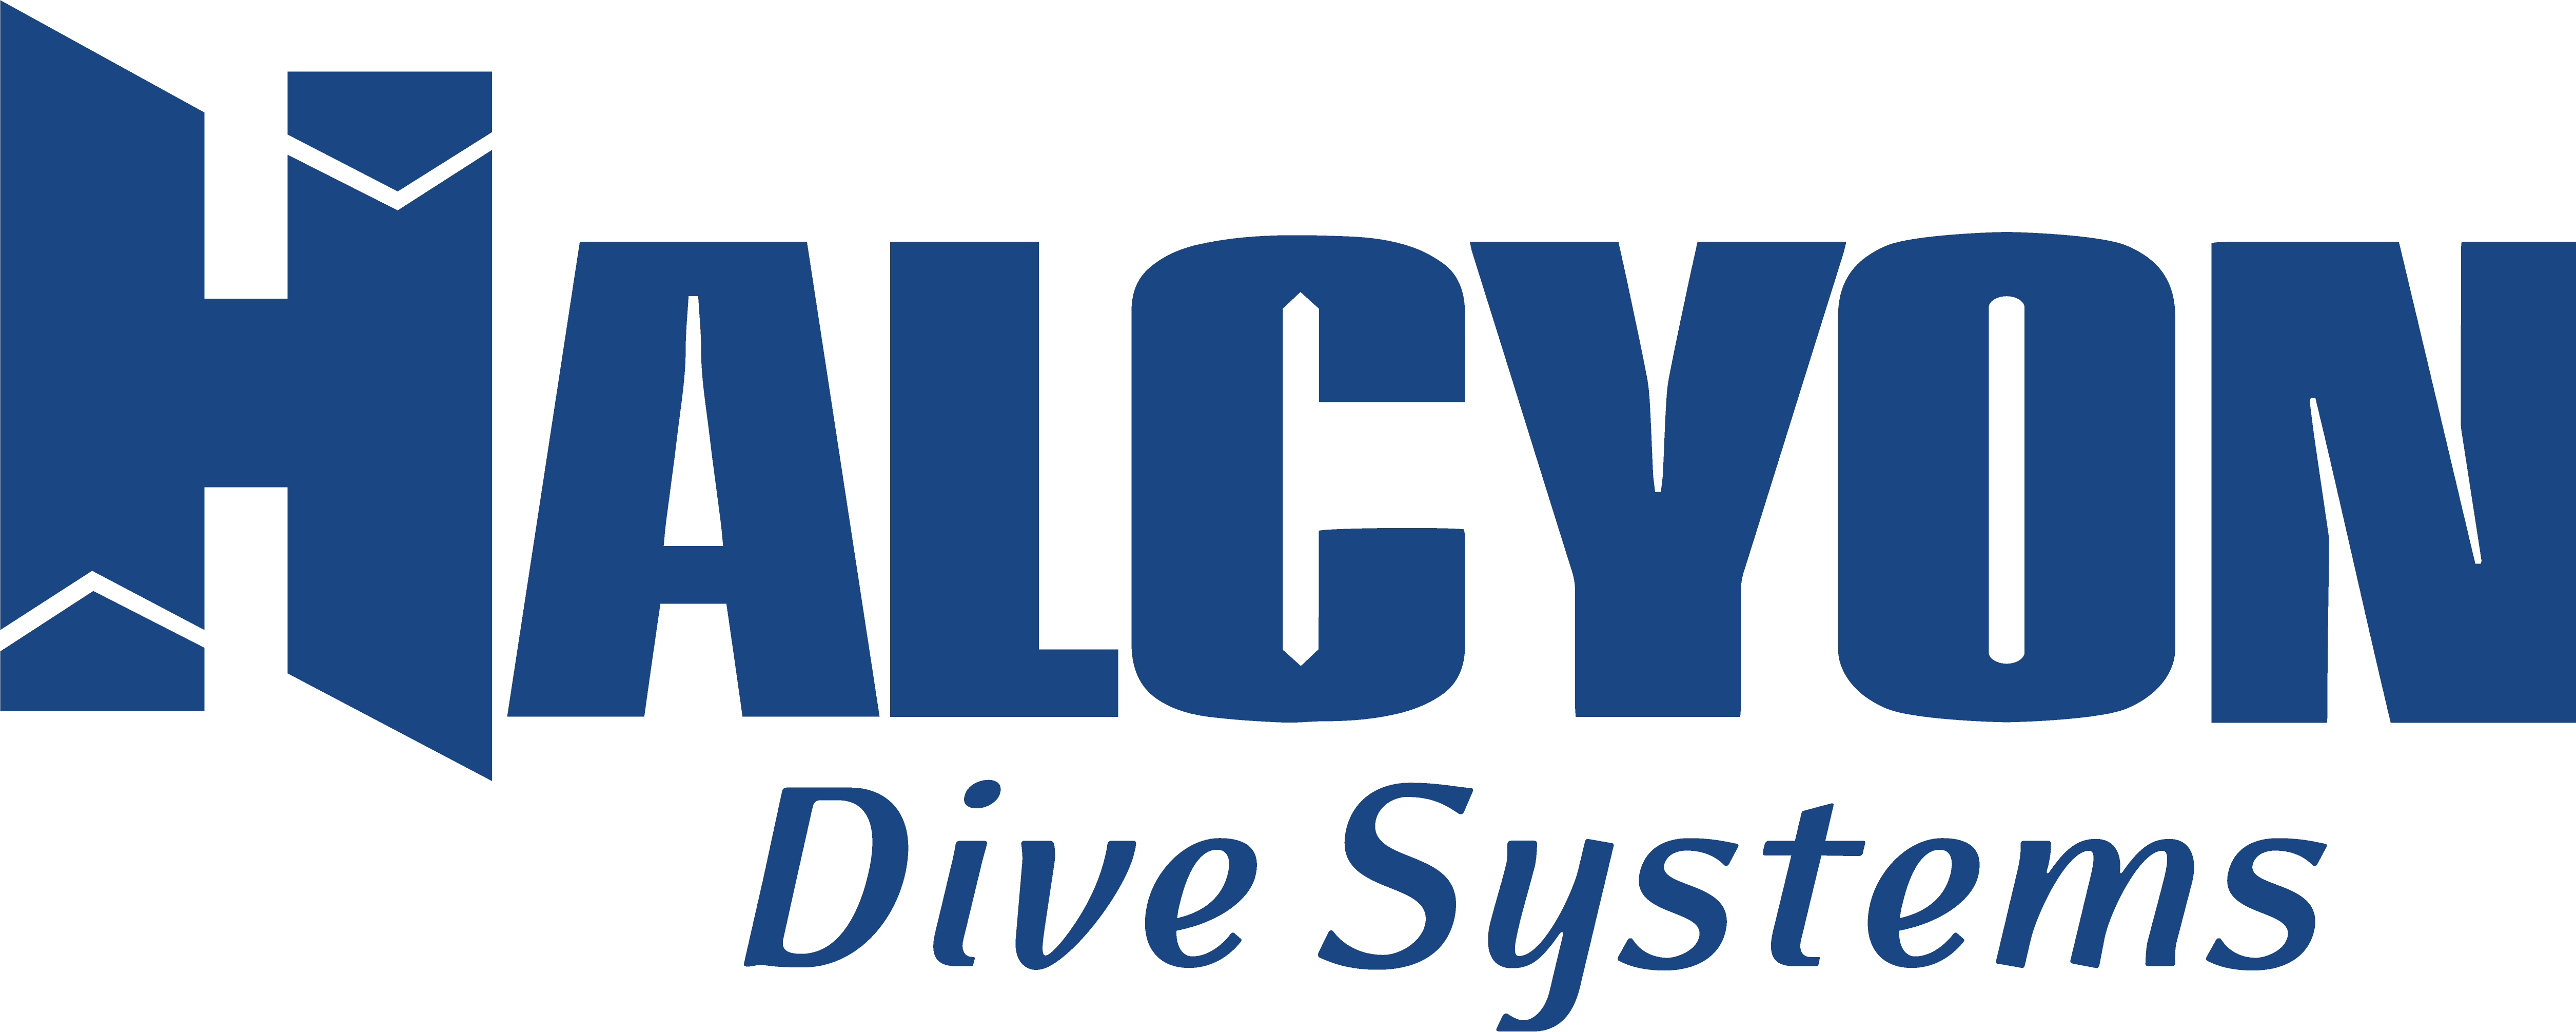 HALCYON Dive Systems